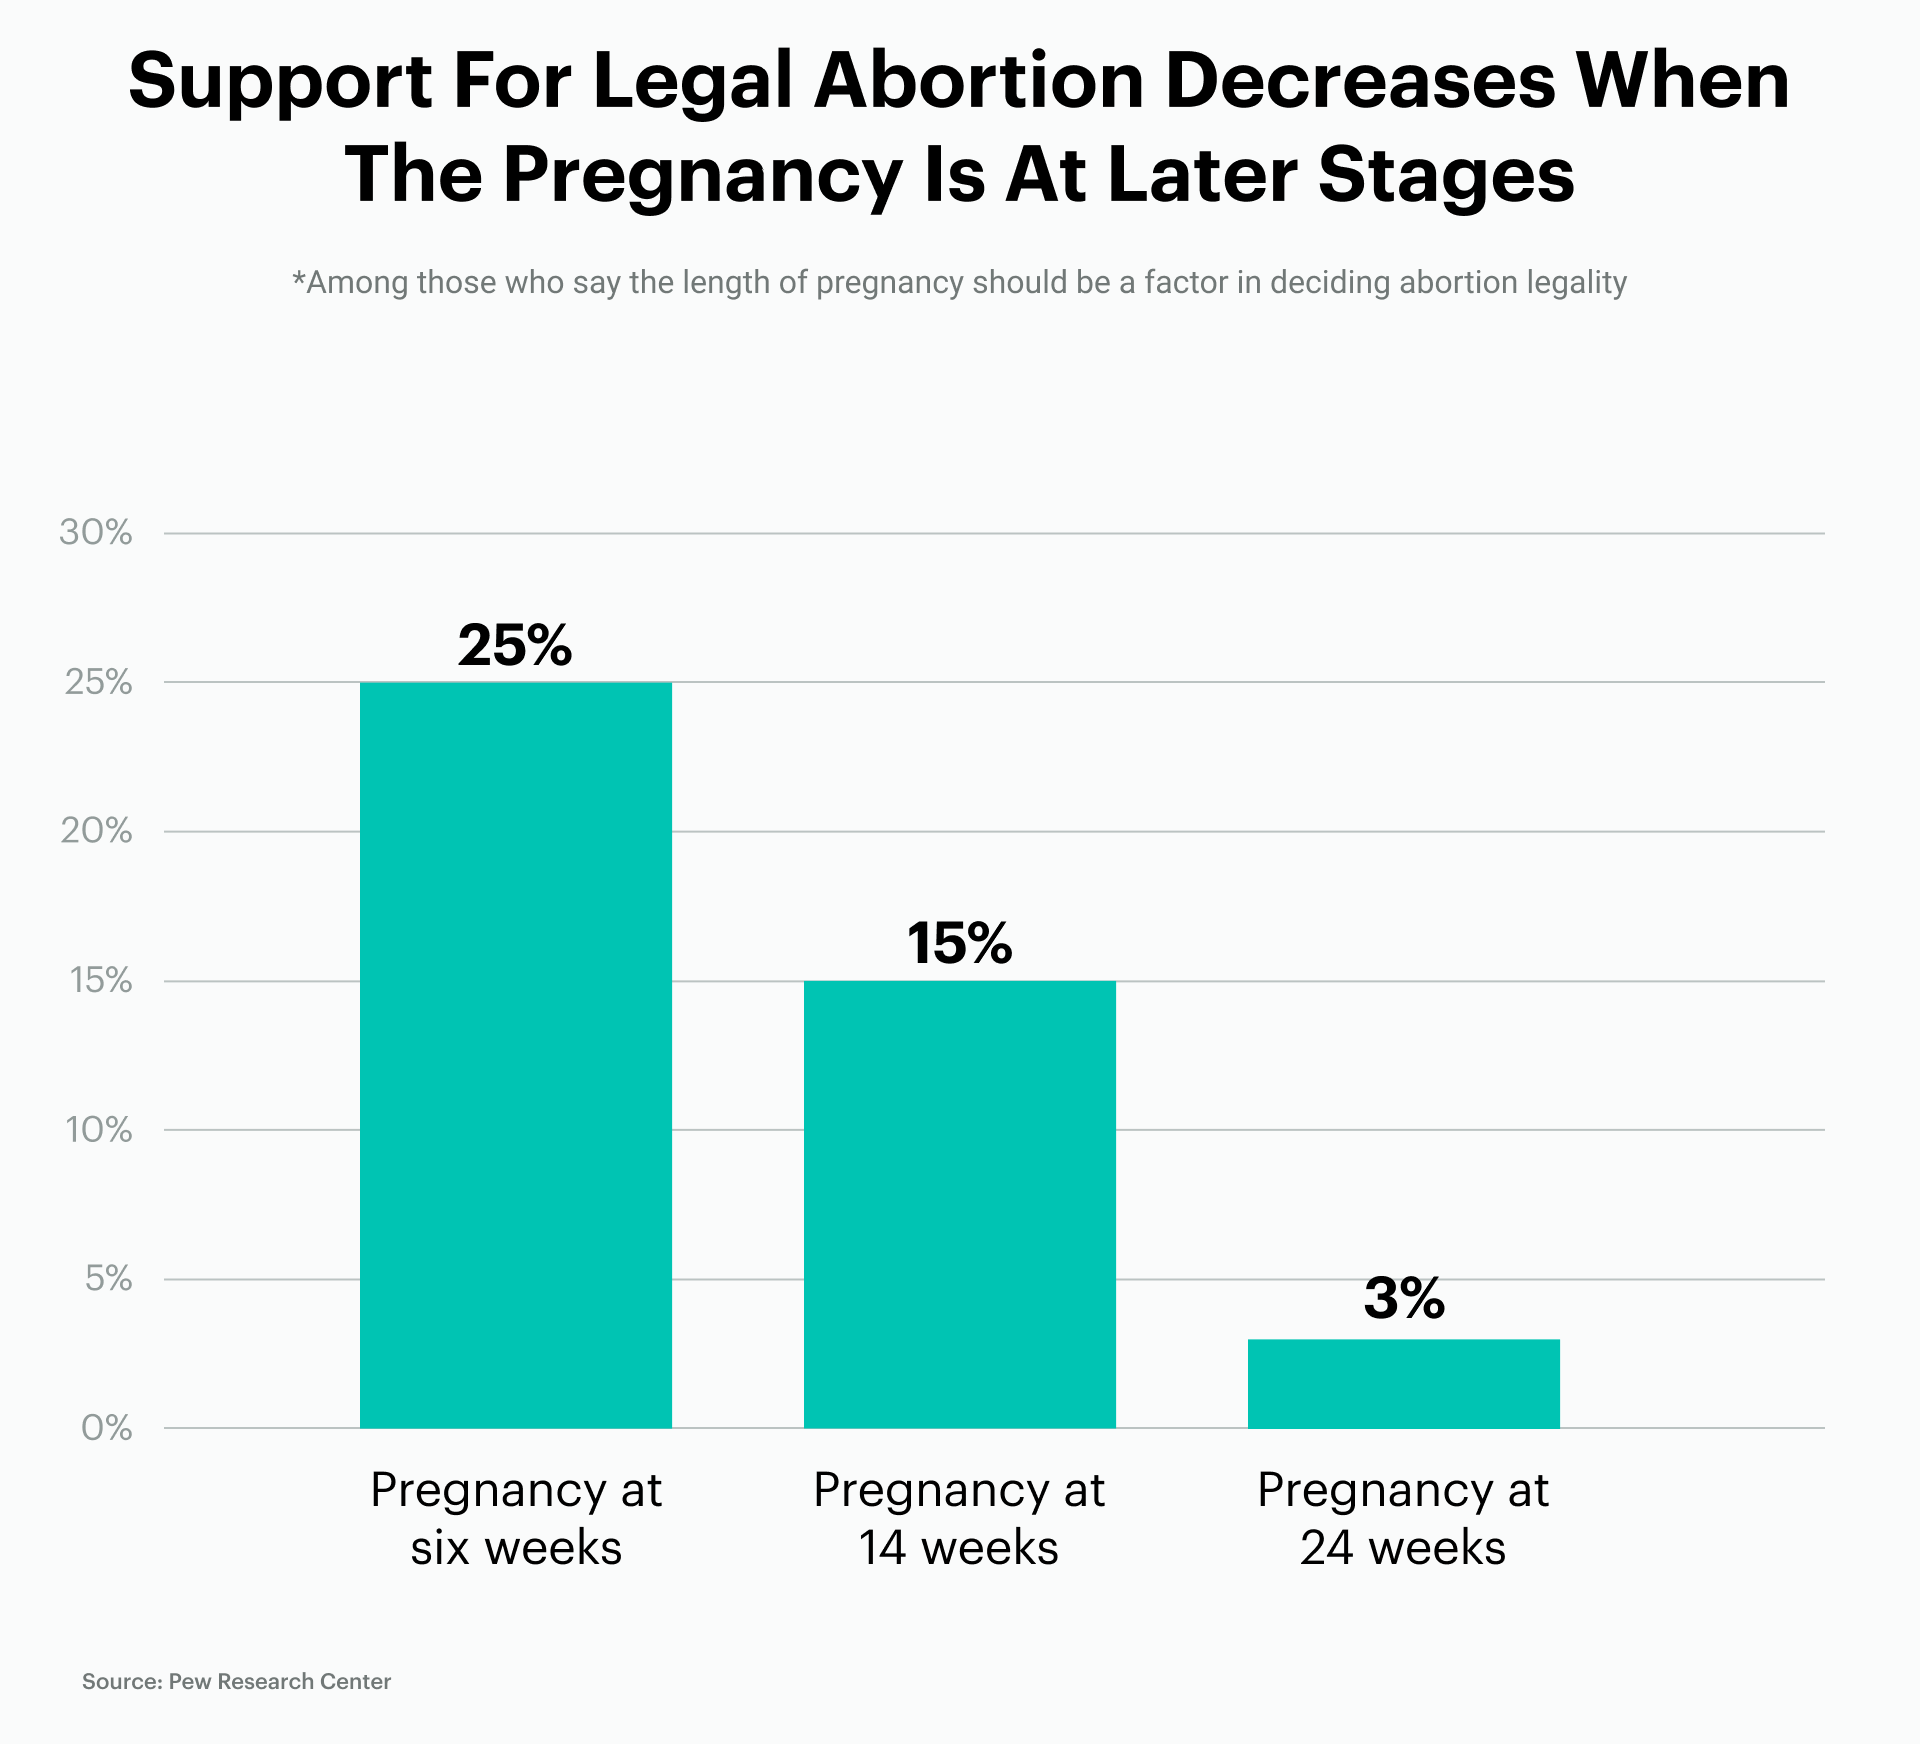 A graph showing how support for abortion declines as a pregnancy is in later stages